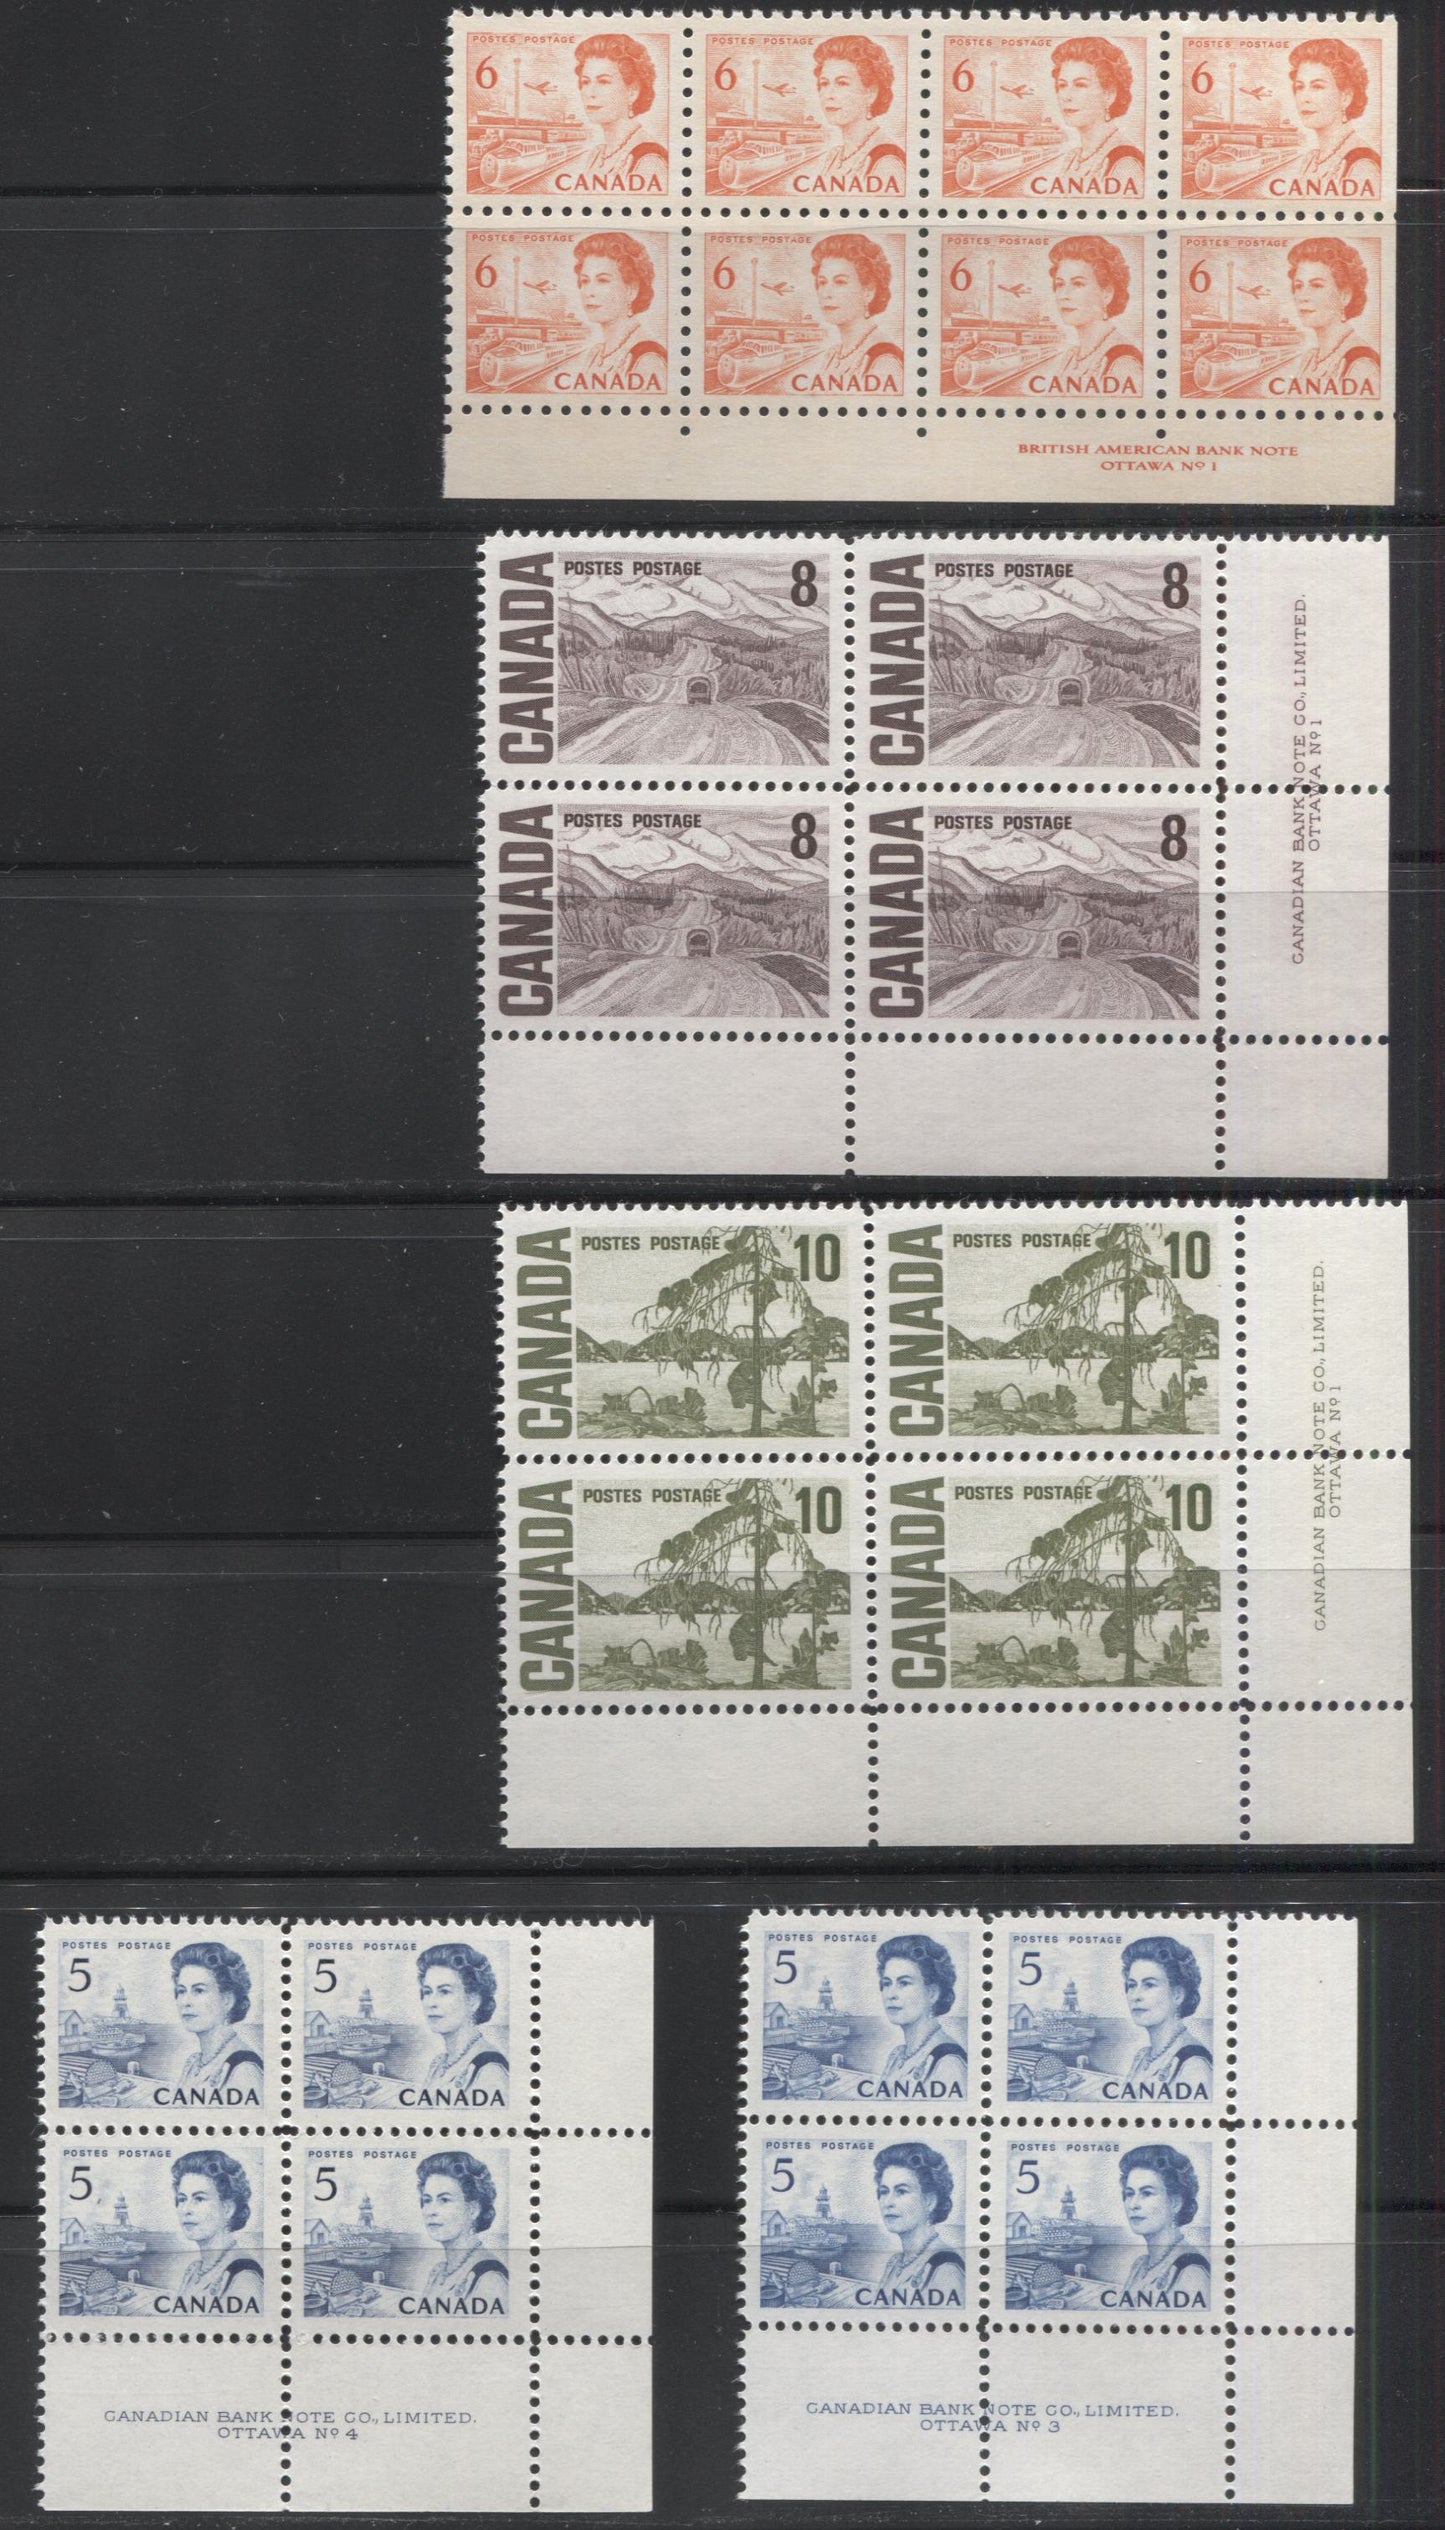 Lot 51 Canada #458-459, 461-462 5c - 6c, 8c - 10c Blue, Orange, Violet Brown & Olive Green Queen Elizabeth II & Alaska Highway, 1967-1973 Centennial Issue, 5 VFNH LR Plates 1-2, 4 Blocks Of 4 & 8 On Non, Dull & Low Fluorescent Papers